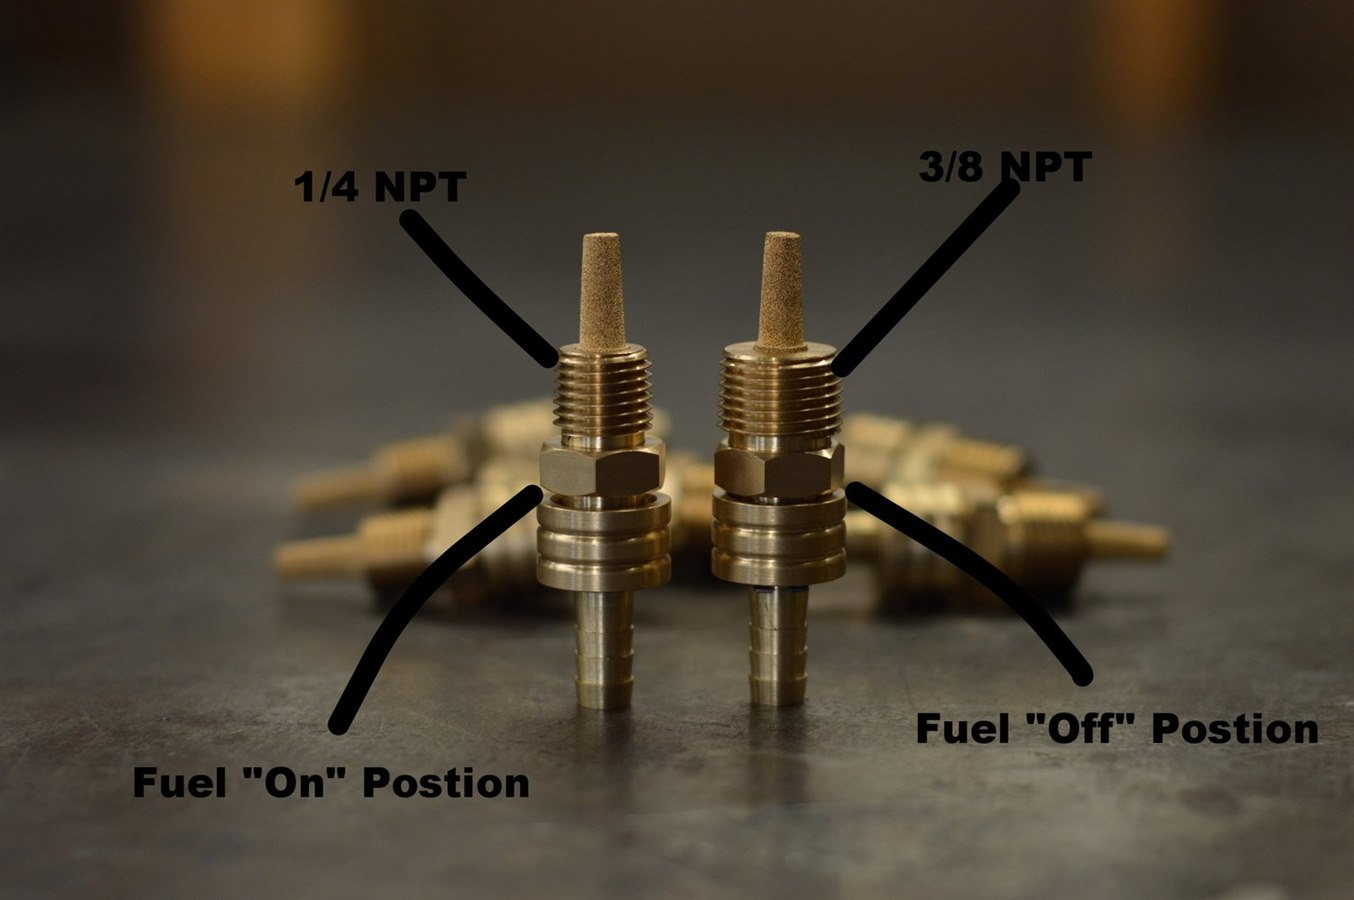 A set of 1/4" NPT Male Brass Fuel Petcocks by Prism Supply Co on a table.